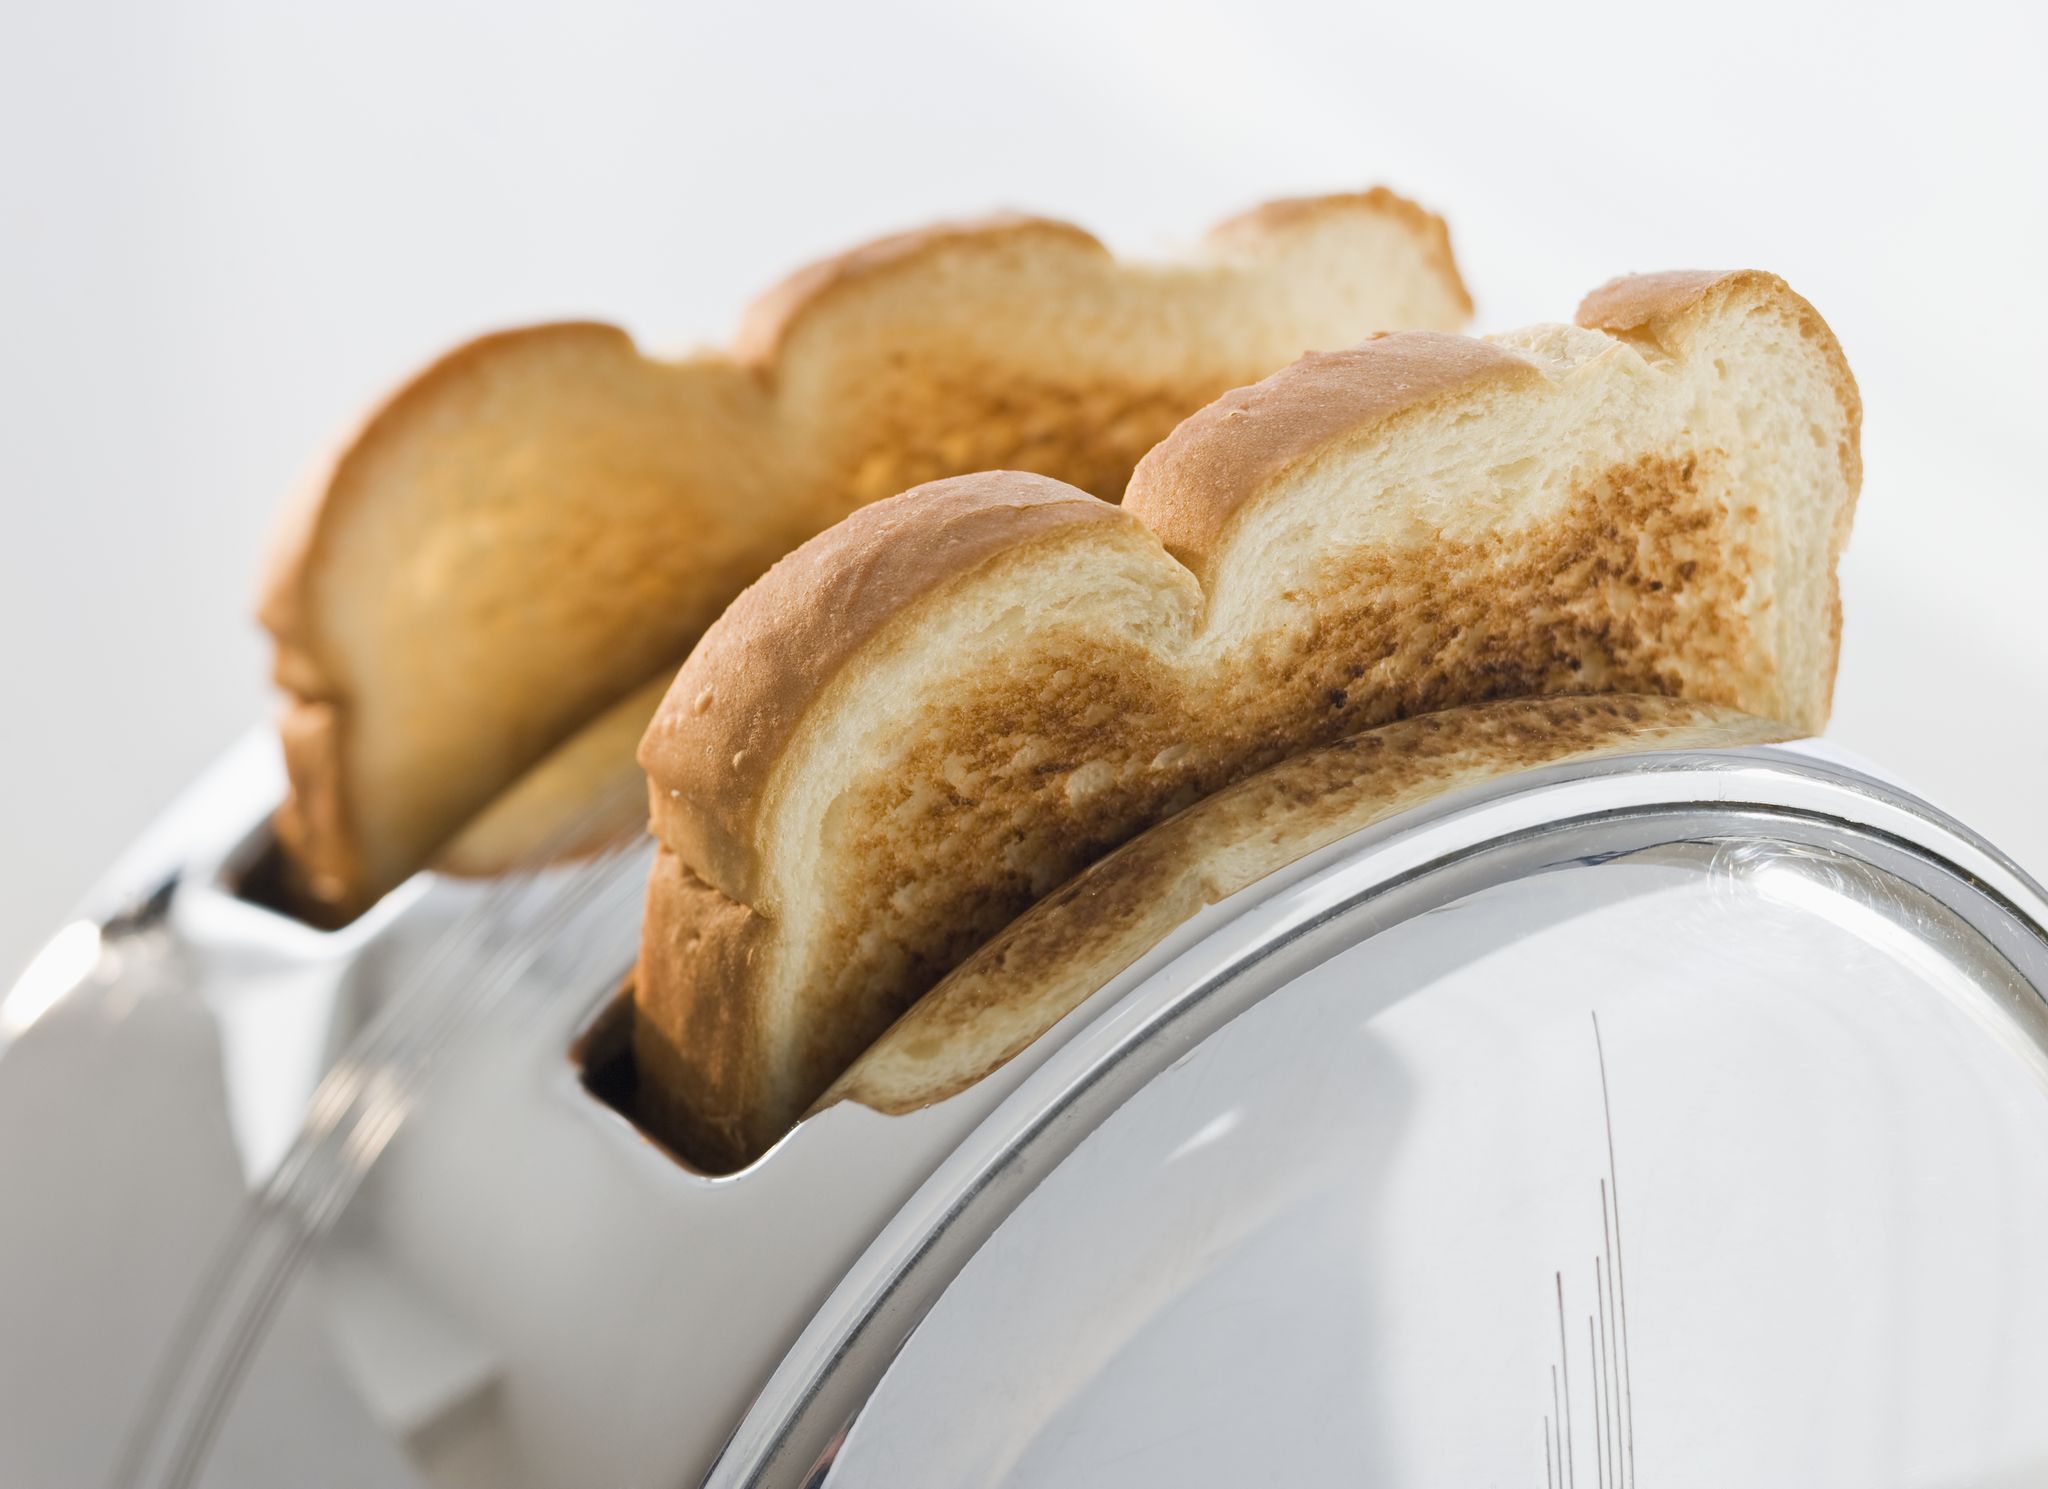 Toaster with popped up toasts, close-up